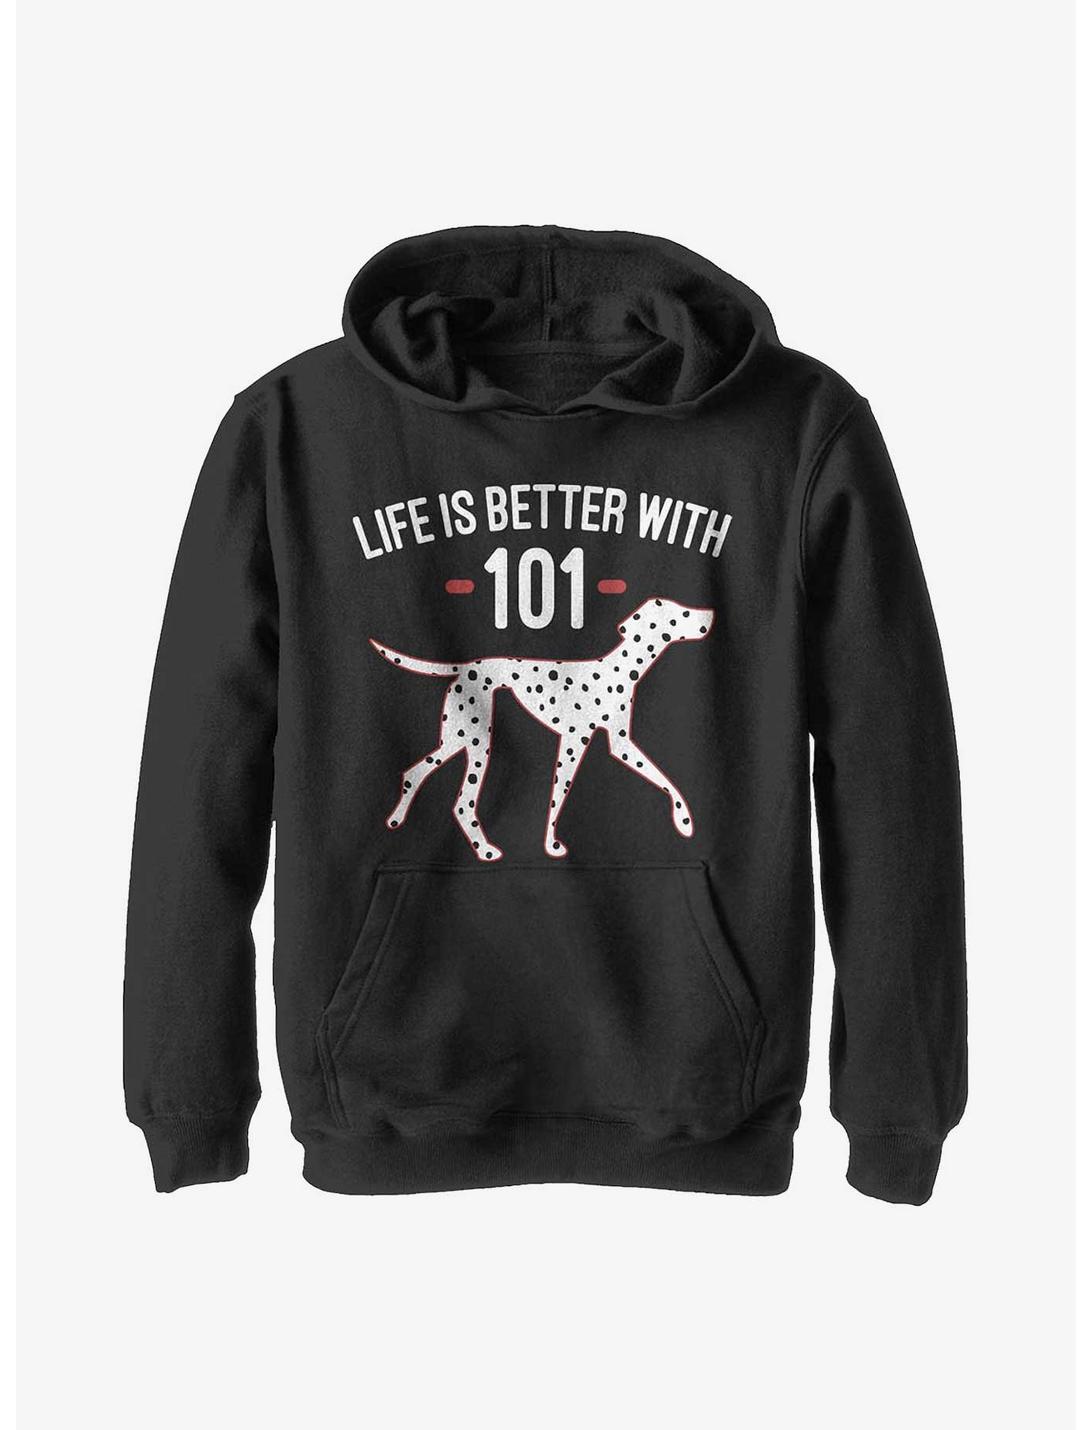 Disney 101 Dalmatians Better With Youth Hoodie, BLACK, hi-res